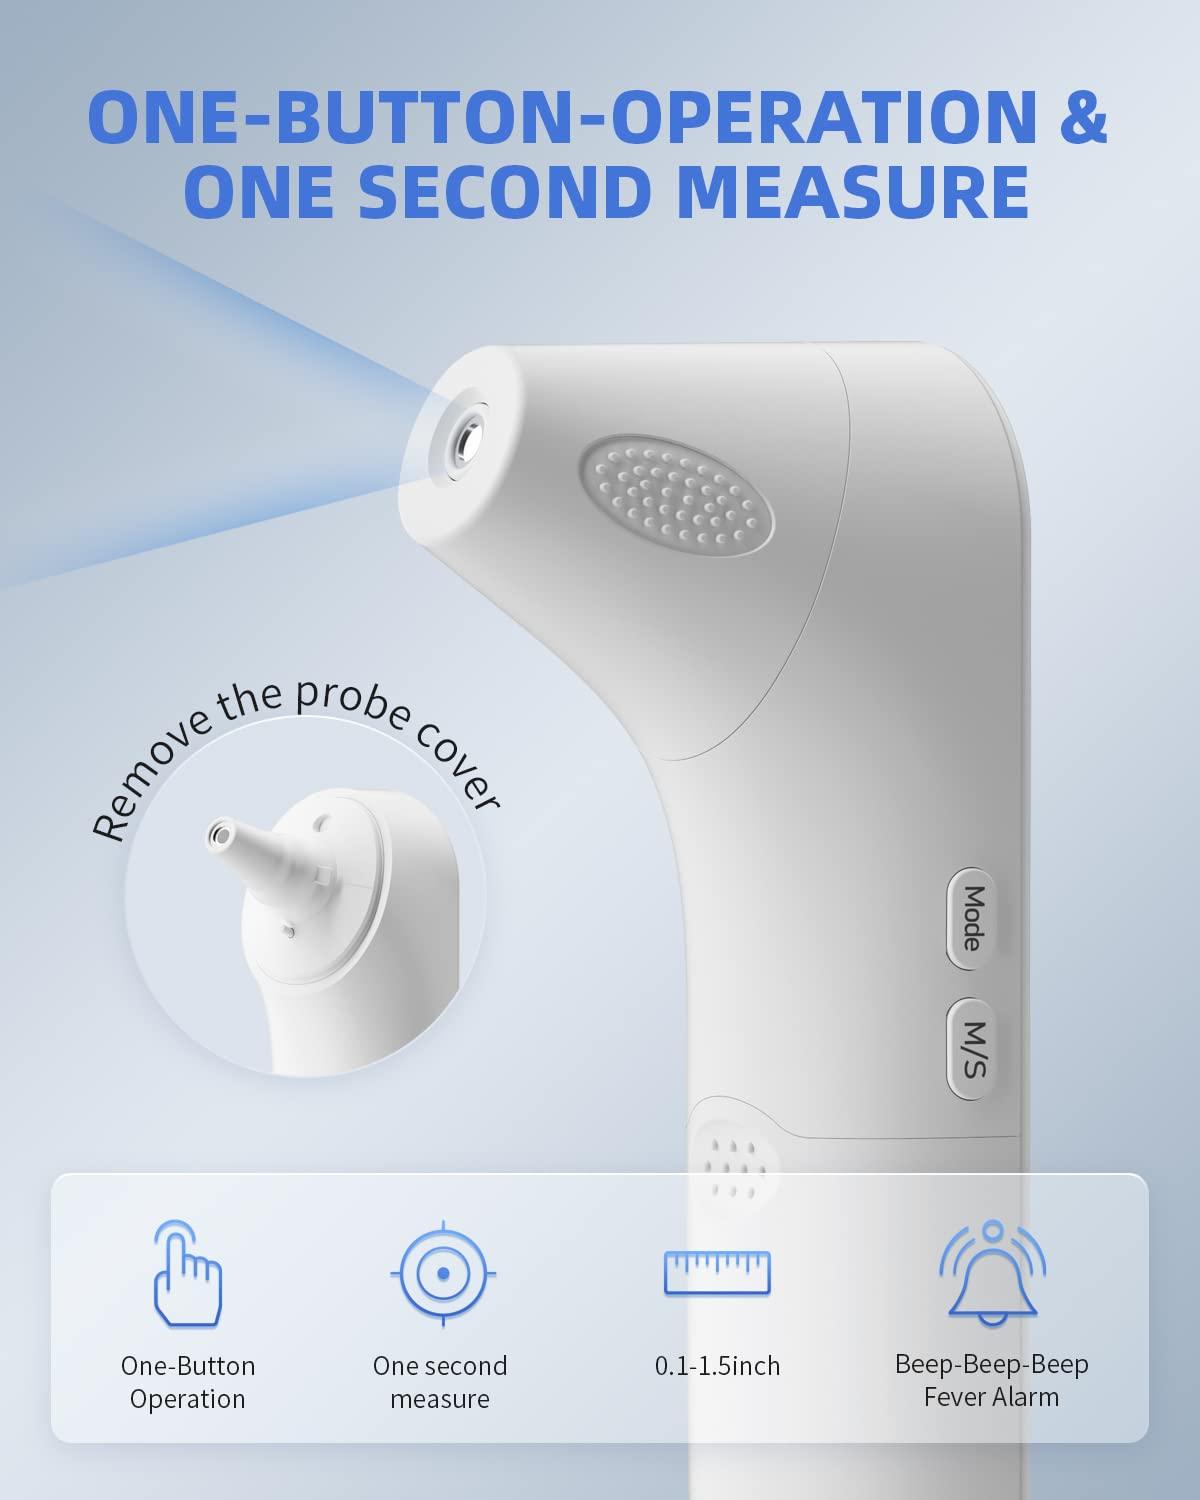 Contactless Digital Forehead Thermometer, Fast 1 Second Readings for Body  or Object Temperature, Backlit Display, Fever Alarm Beep and Color, Memory